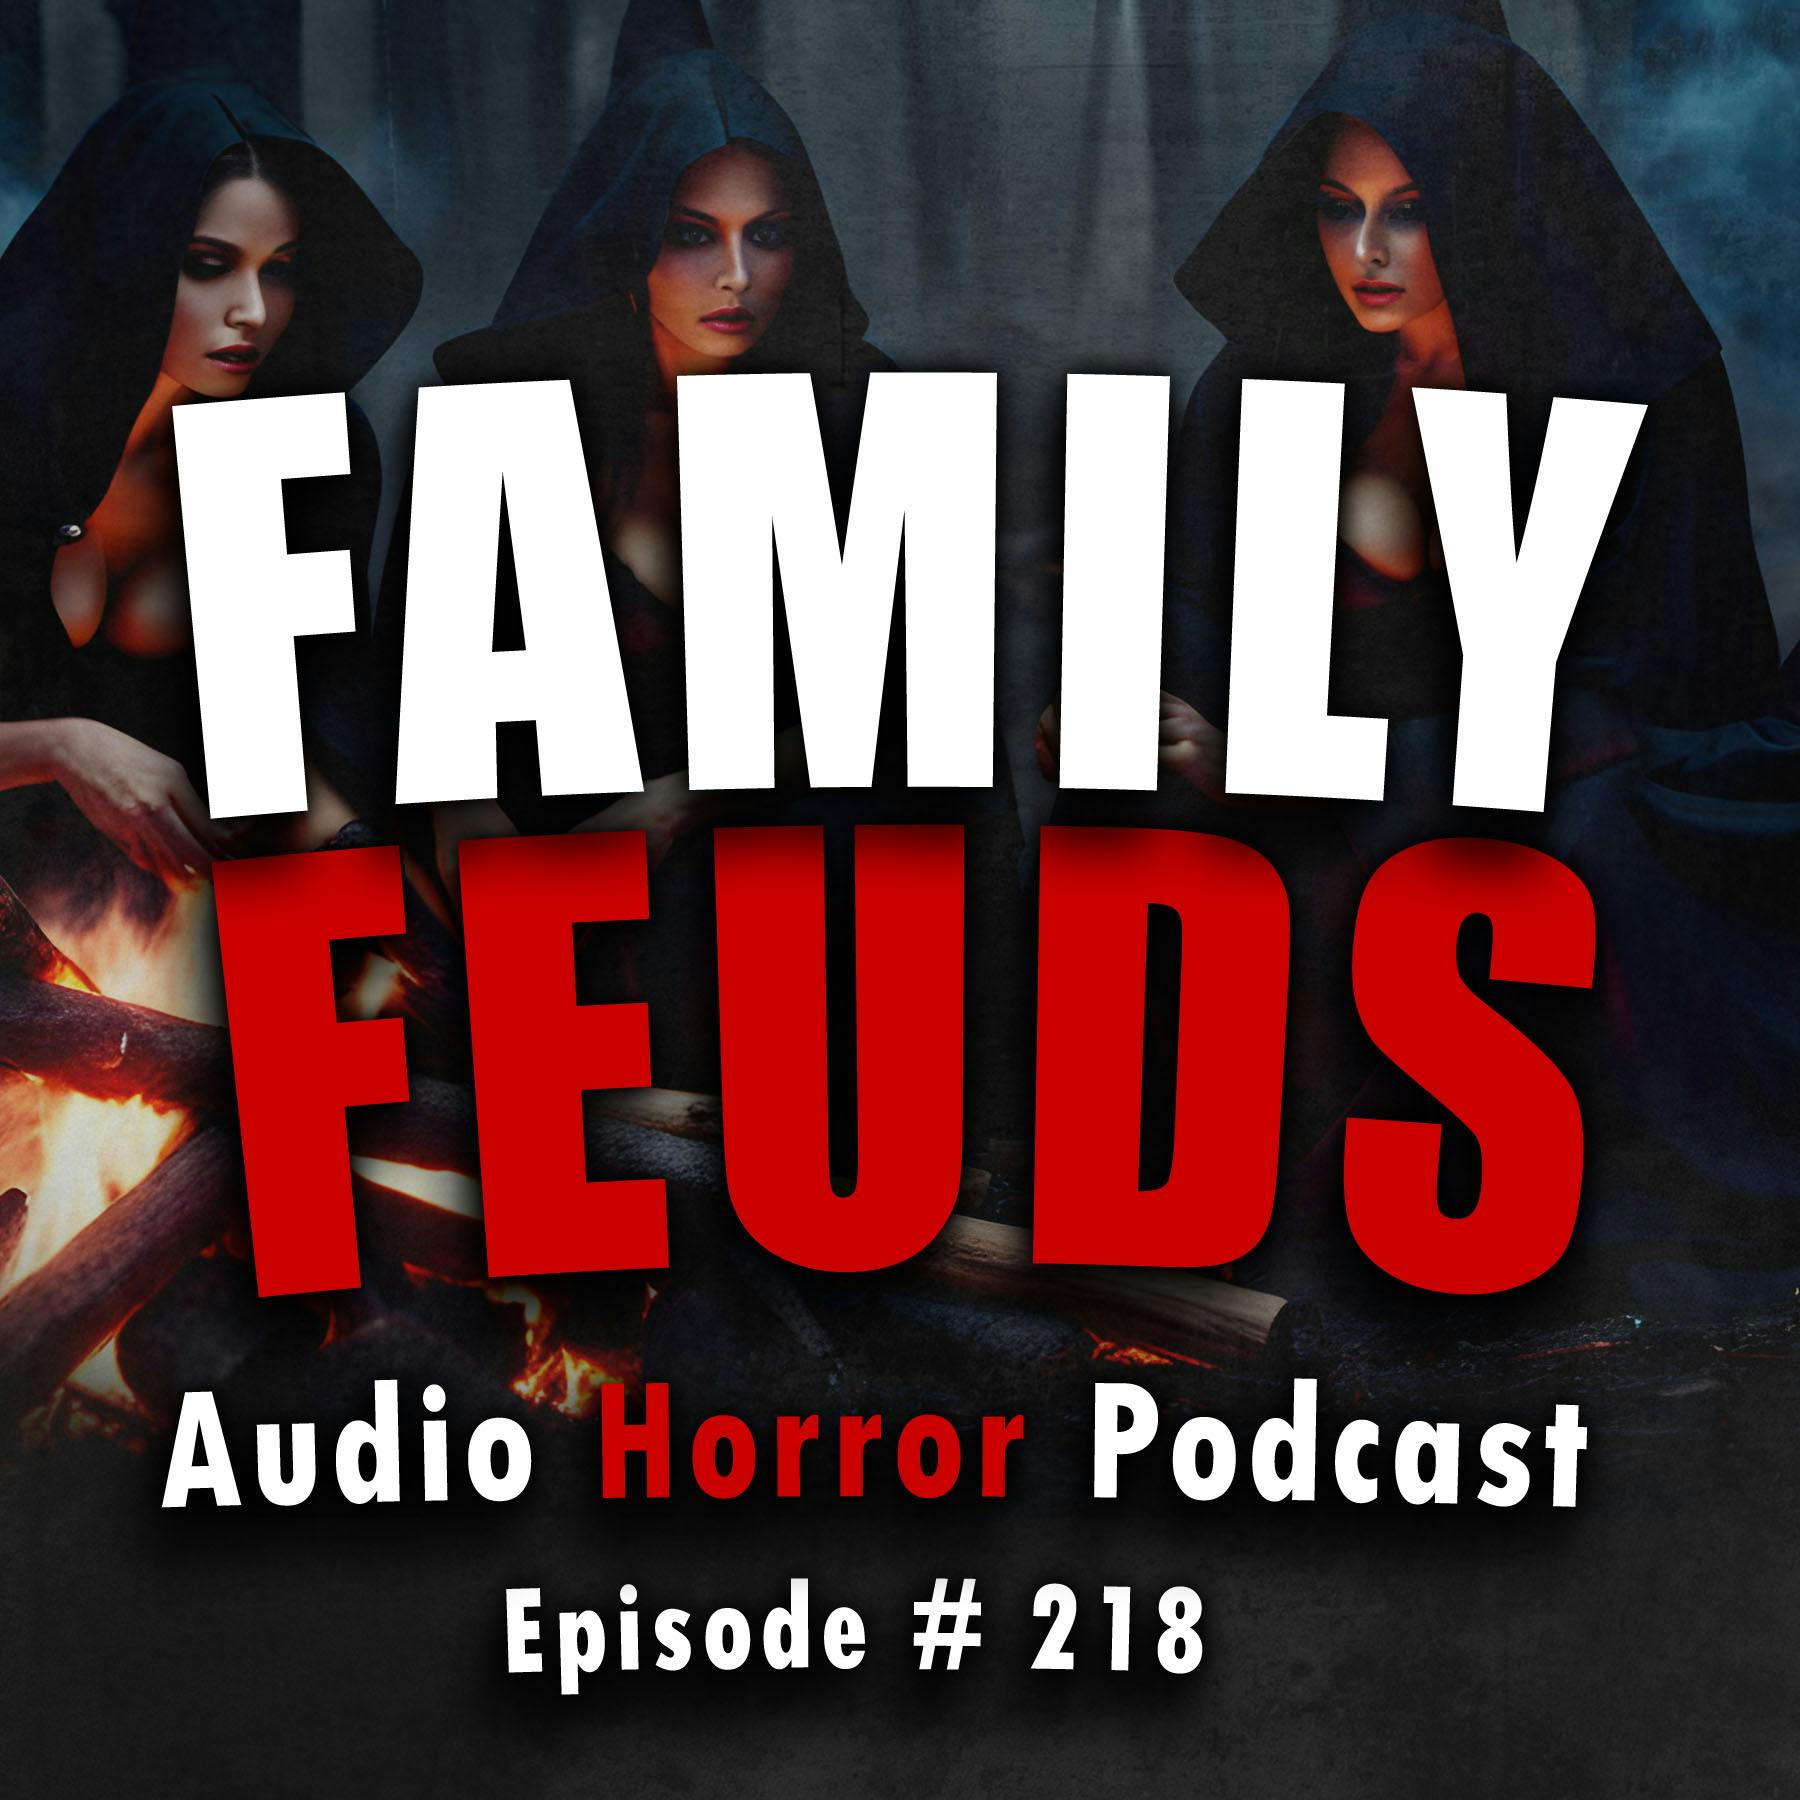 218: Family Feuds - Chilling Tales for Dark Nights